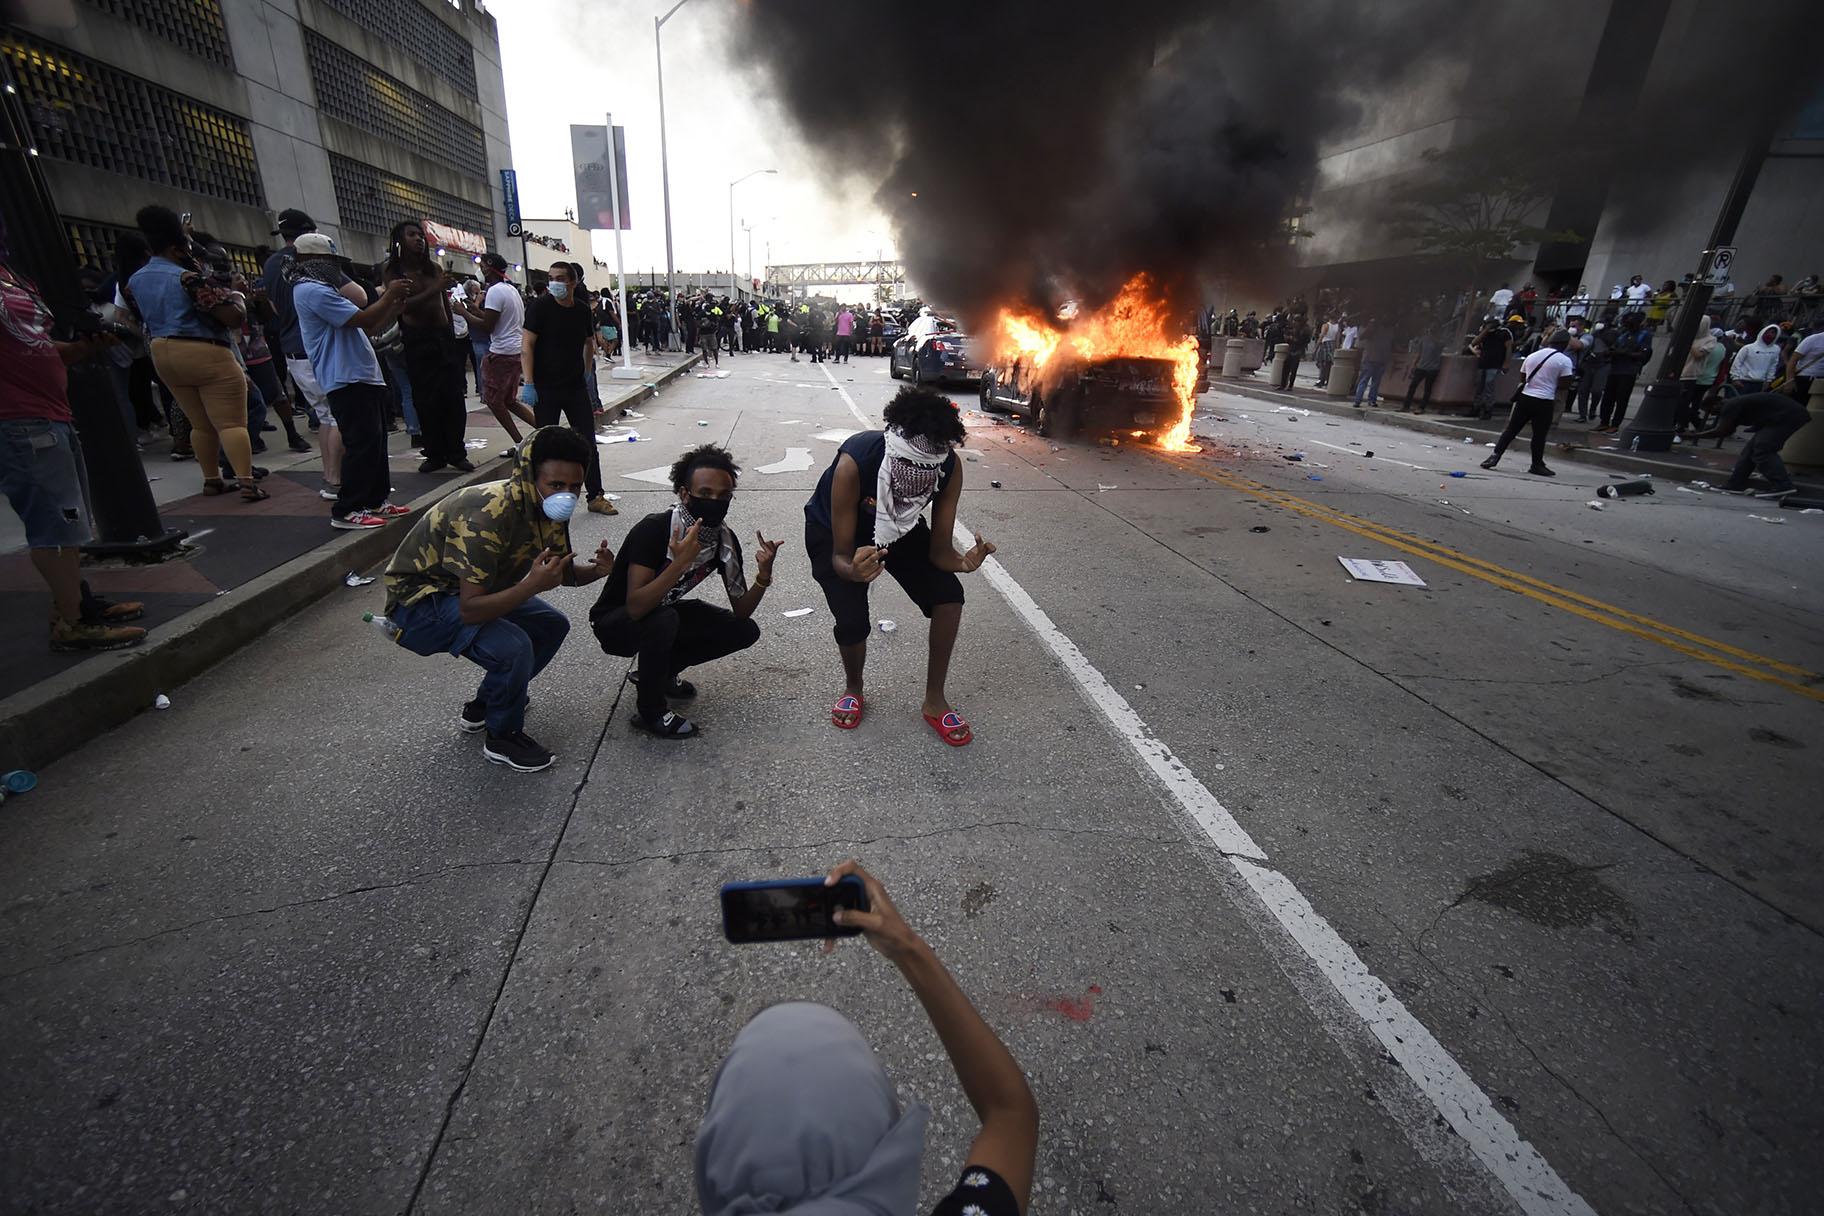 An Atlanta Police Department vehicle burns as people pose for a photo during a demonstration against police violence, Friday, May 29, 2020, in Atlanta. (AP Photo / Mike Stewart)